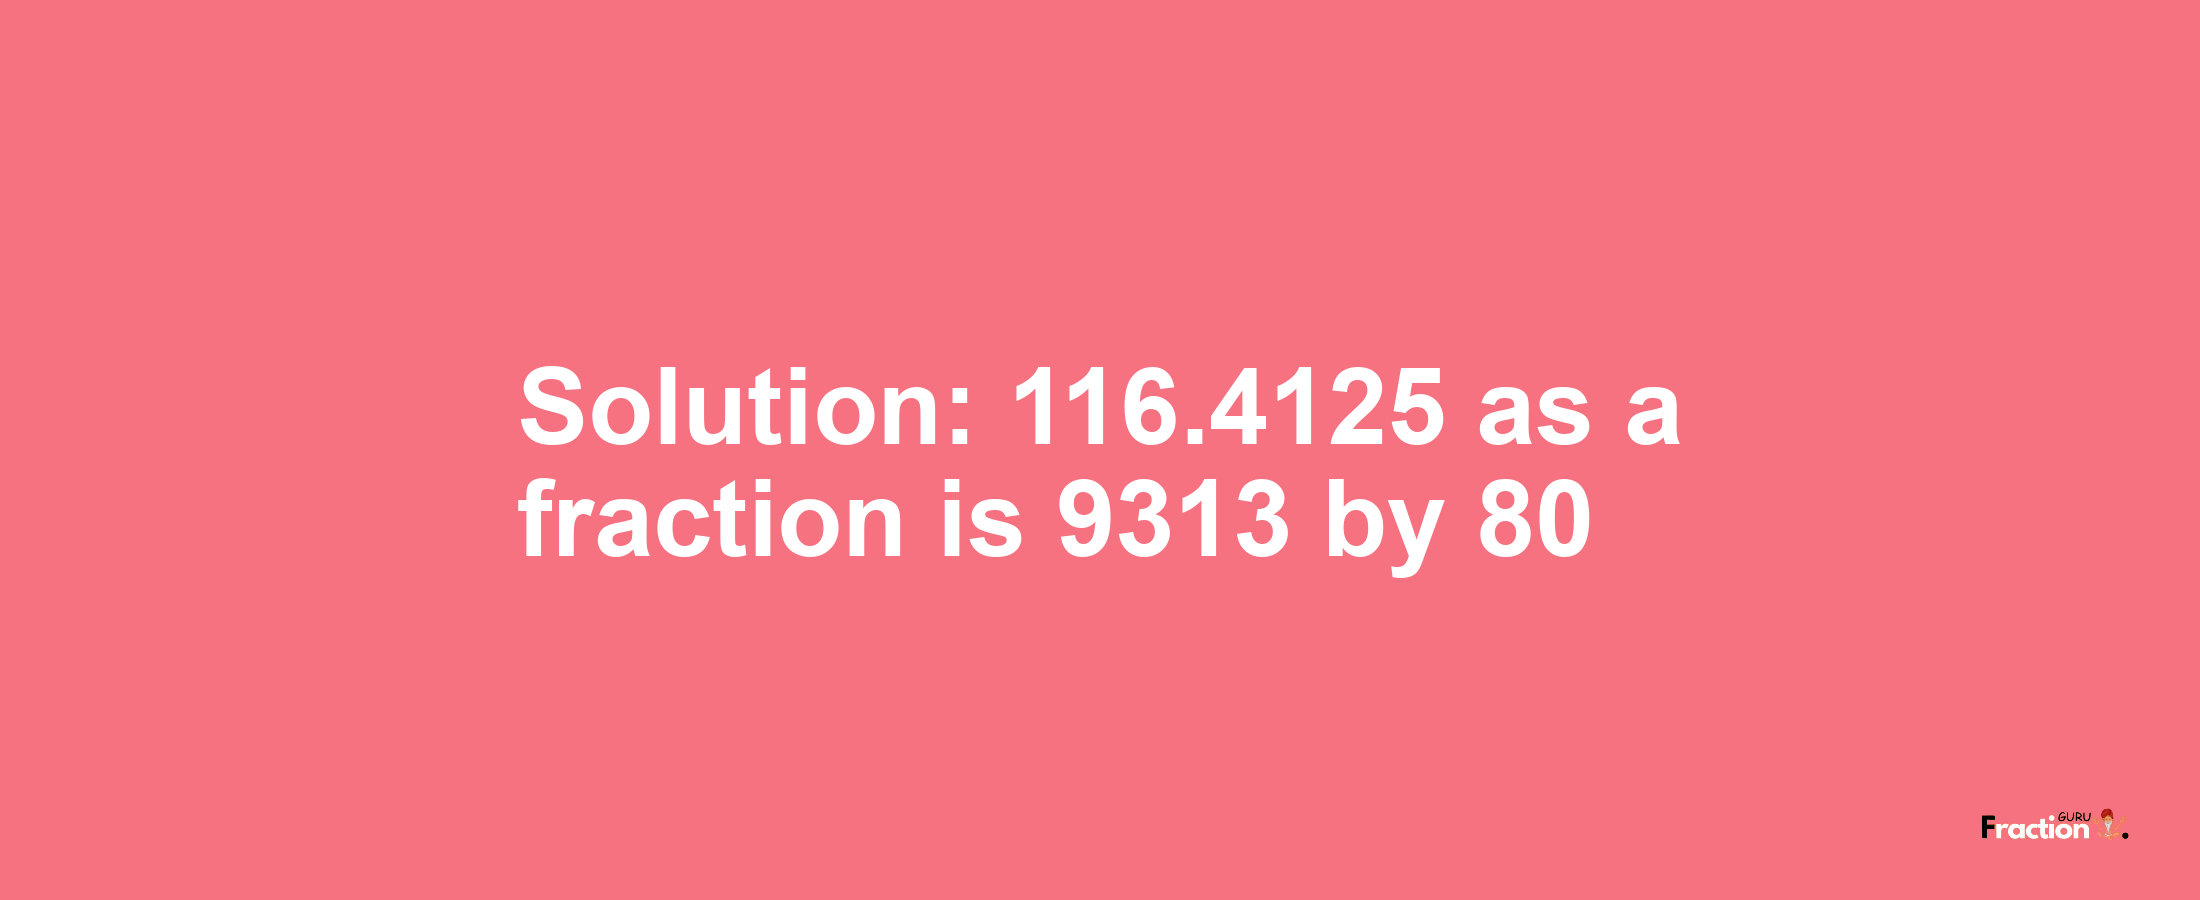 Solution:116.4125 as a fraction is 9313/80